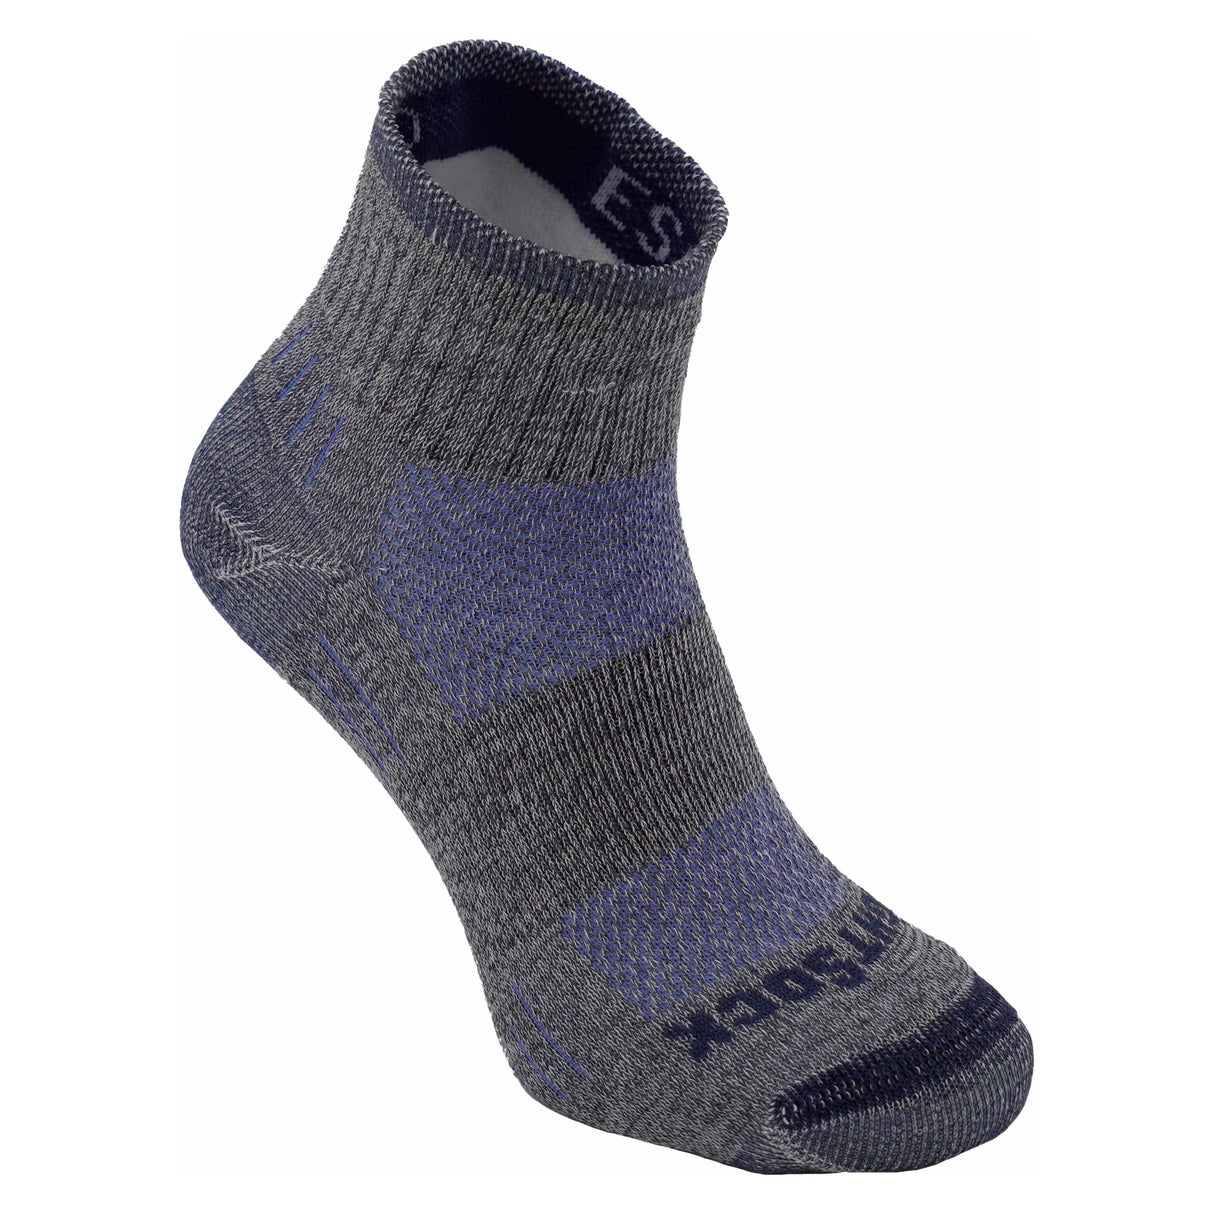 Wrightsock Double-Layer Escape Midweight Quarter Socks  -  Small / Ash Twist/Blue